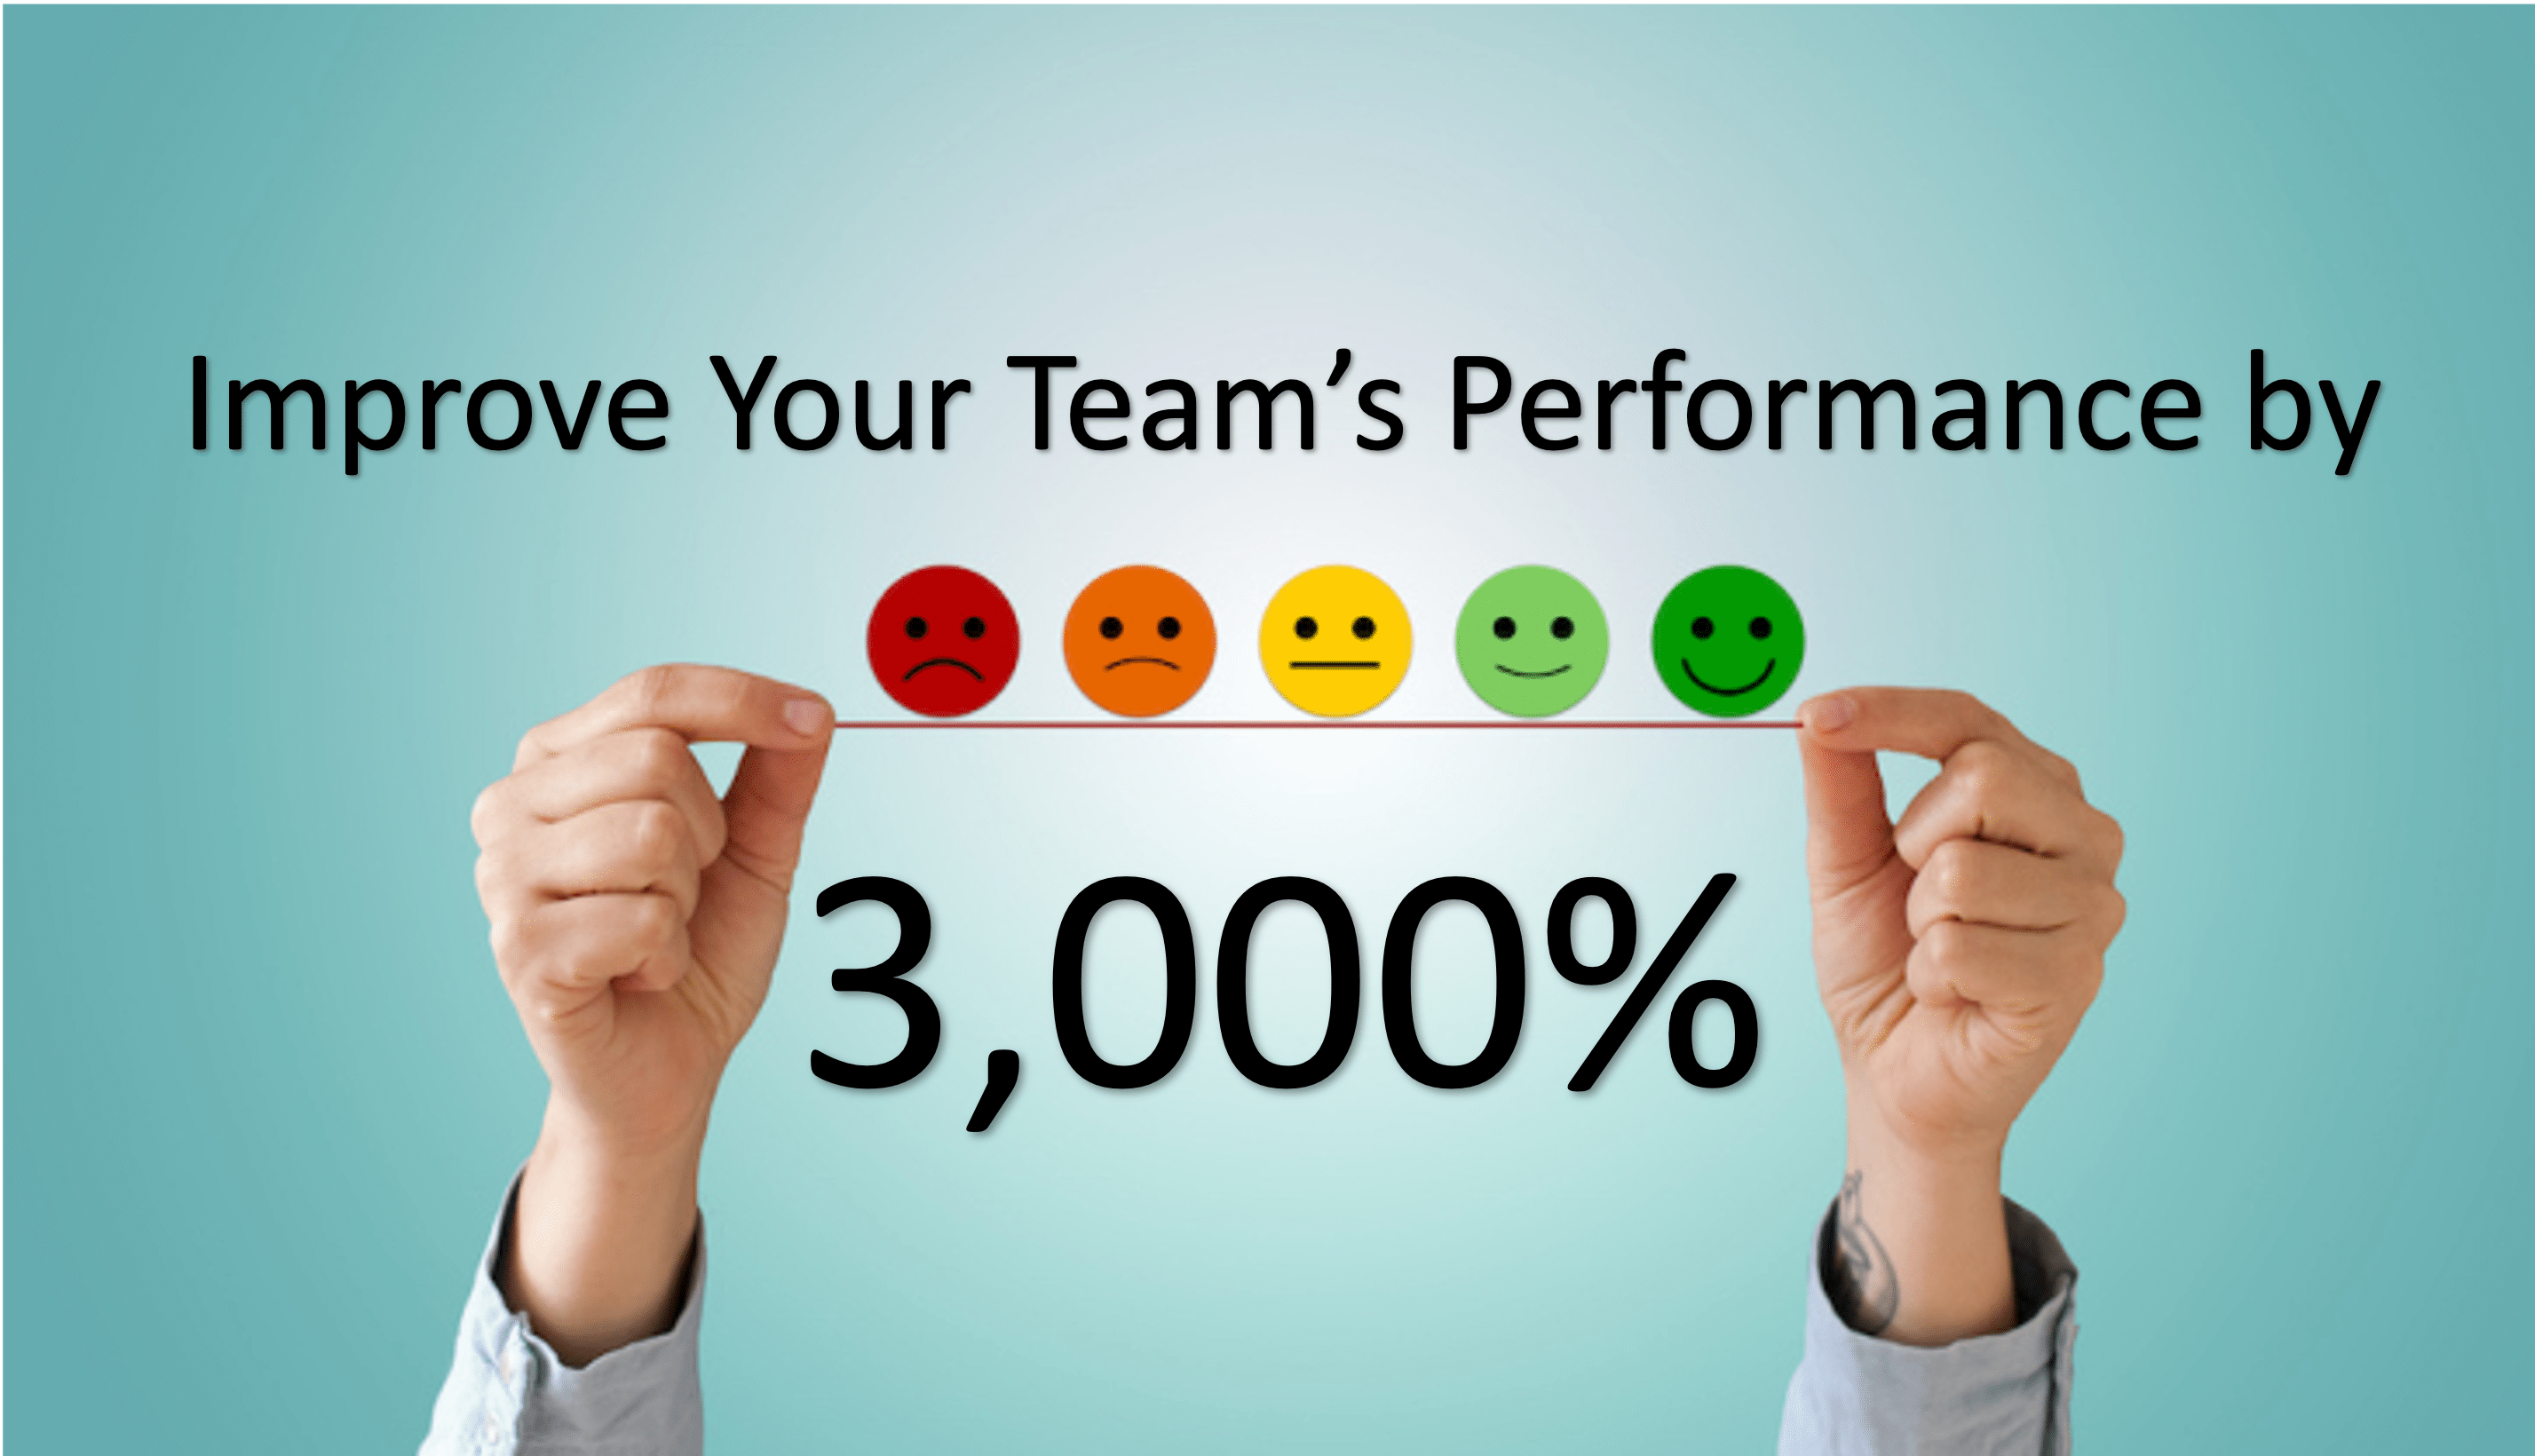 Improve Team Performance by 3,000%